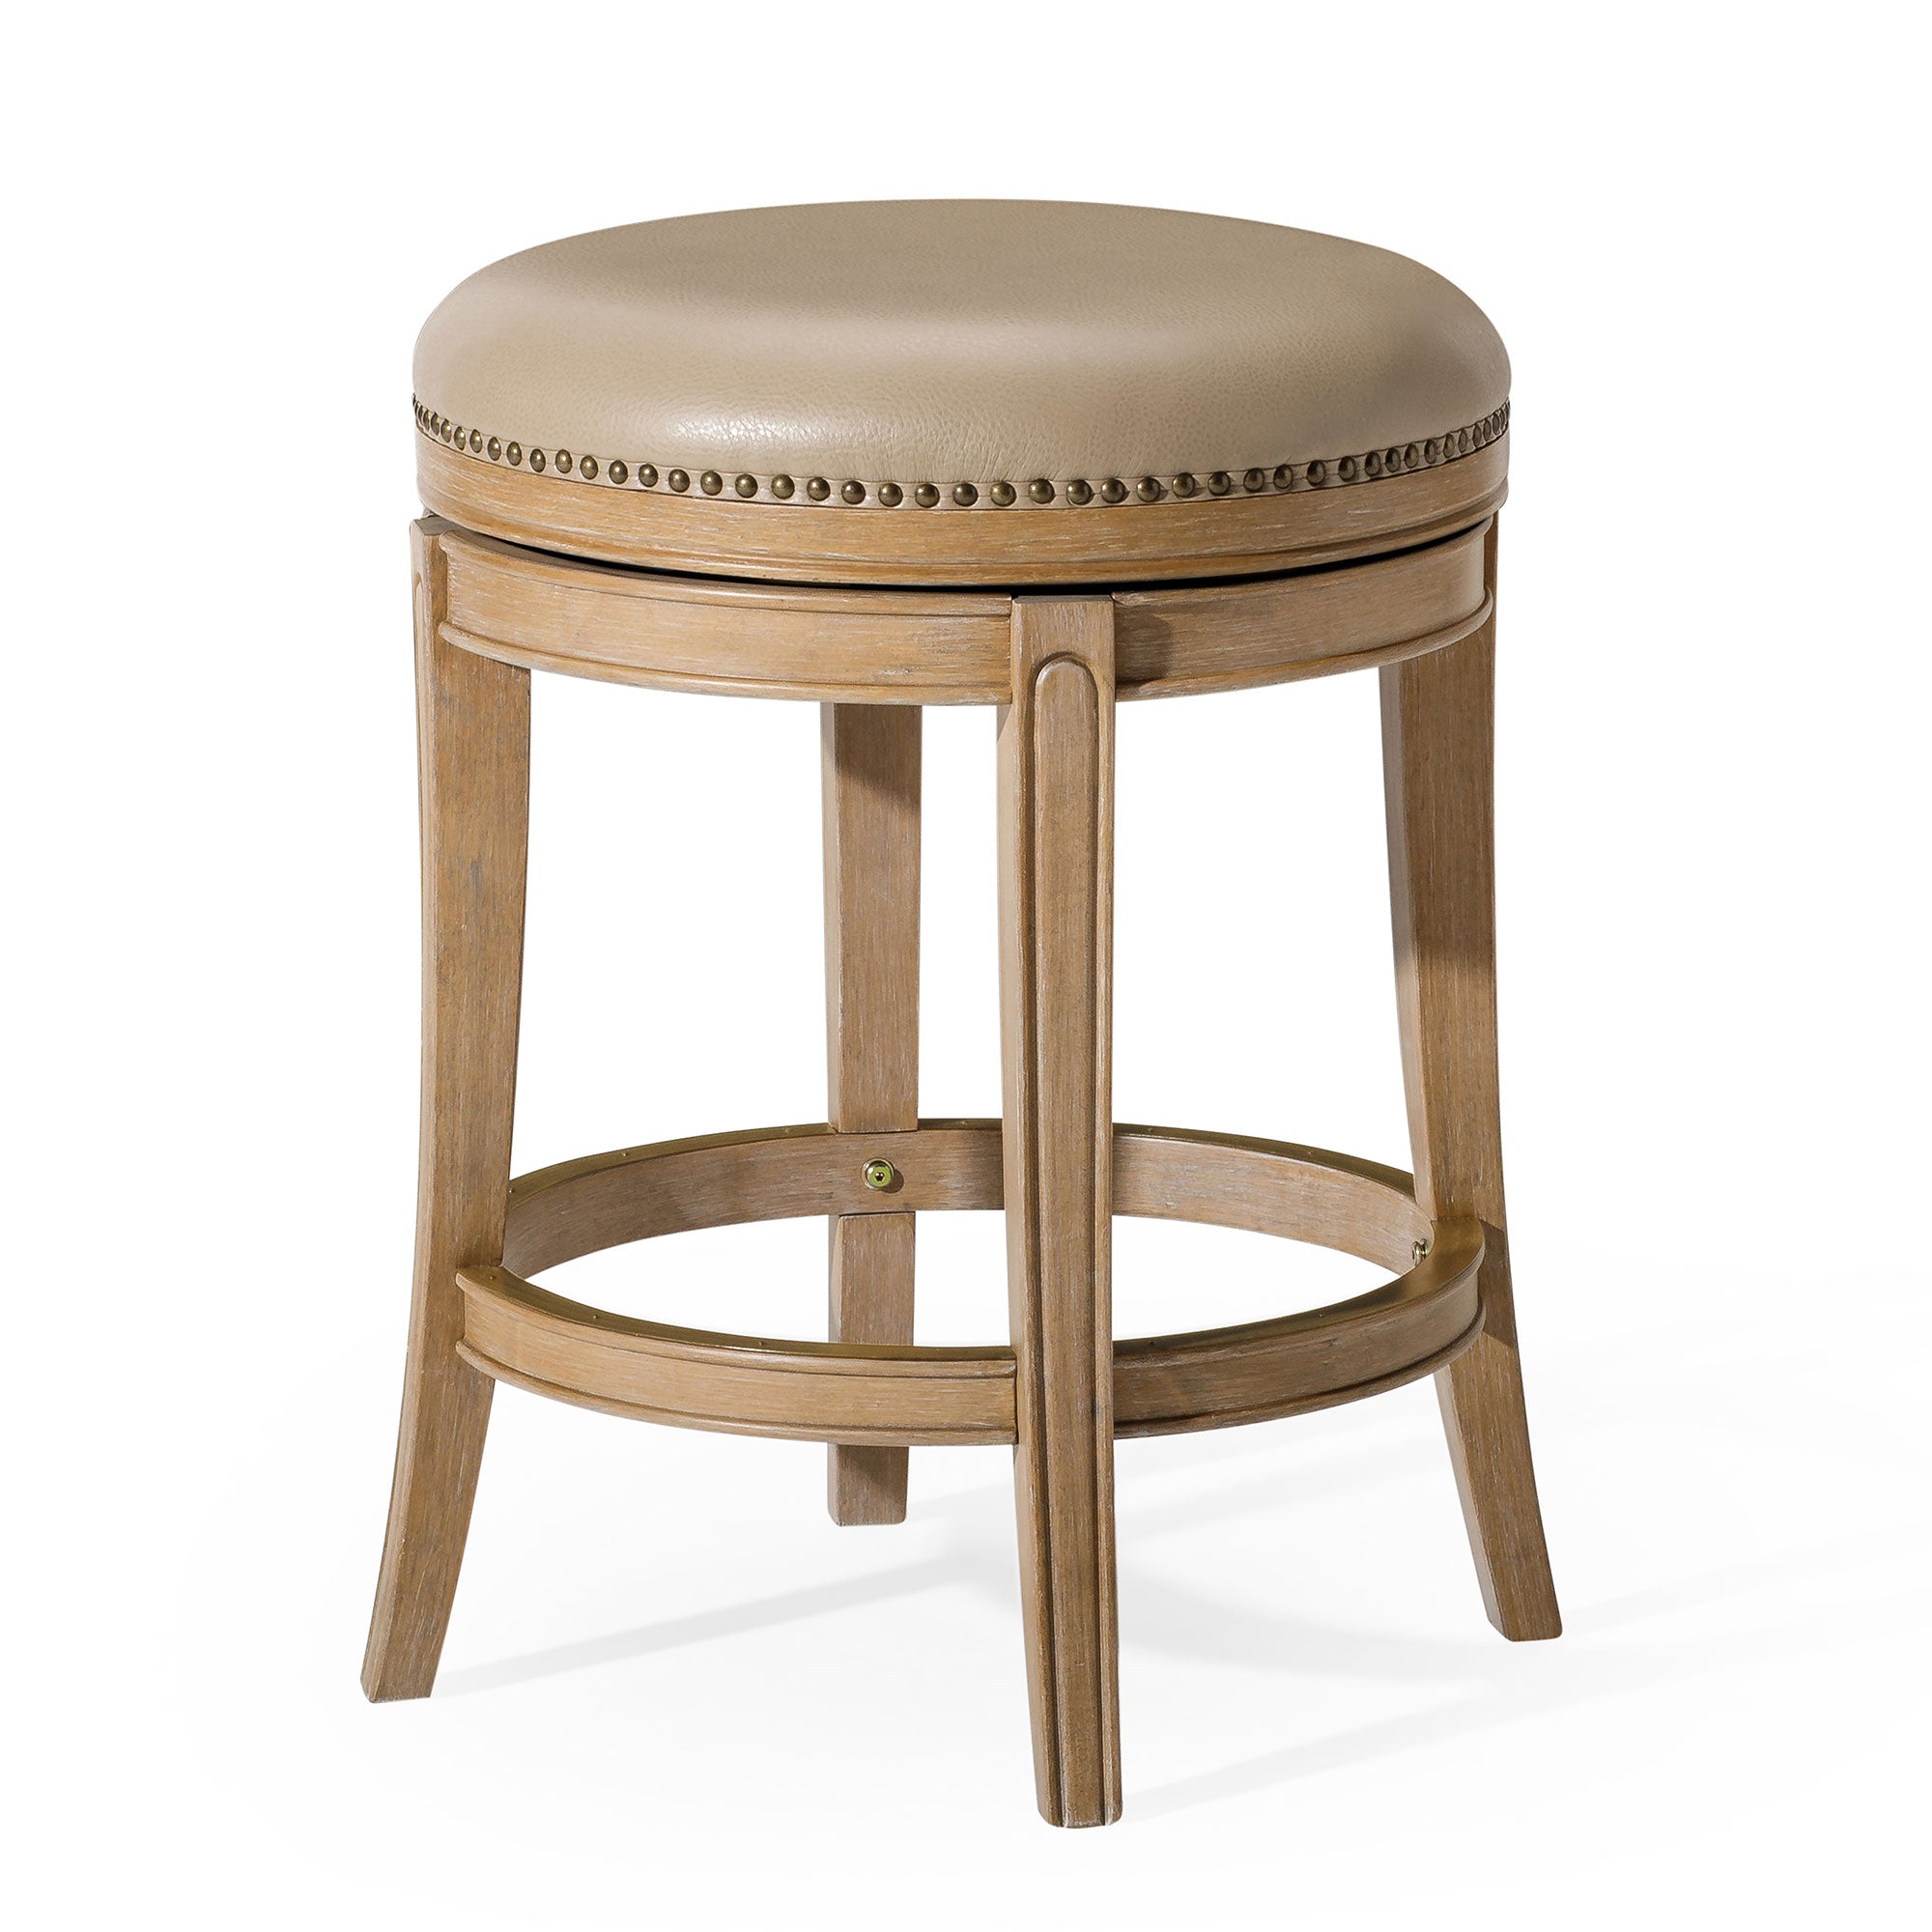 Alexander Backless Counter Stool in Weathered Oak Finish with Avanti Bone Vegan Leather in Stools by Maven Lane